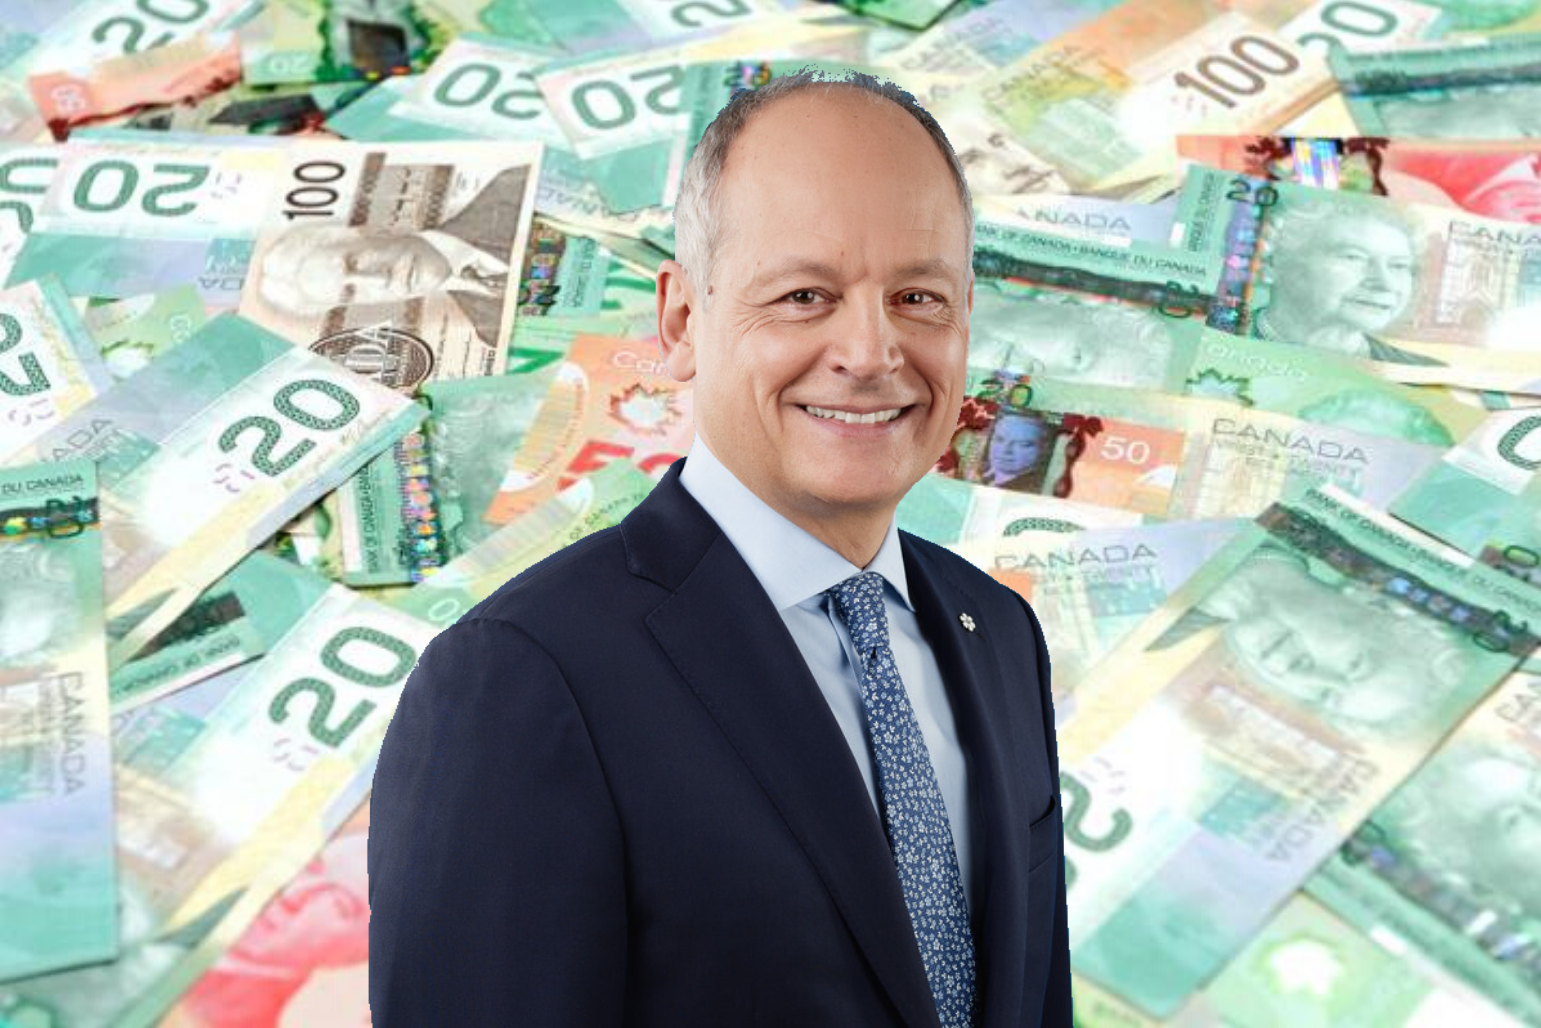 Satire: Meric Gertler finally agrees to divest after inheriting billions in green energy companies